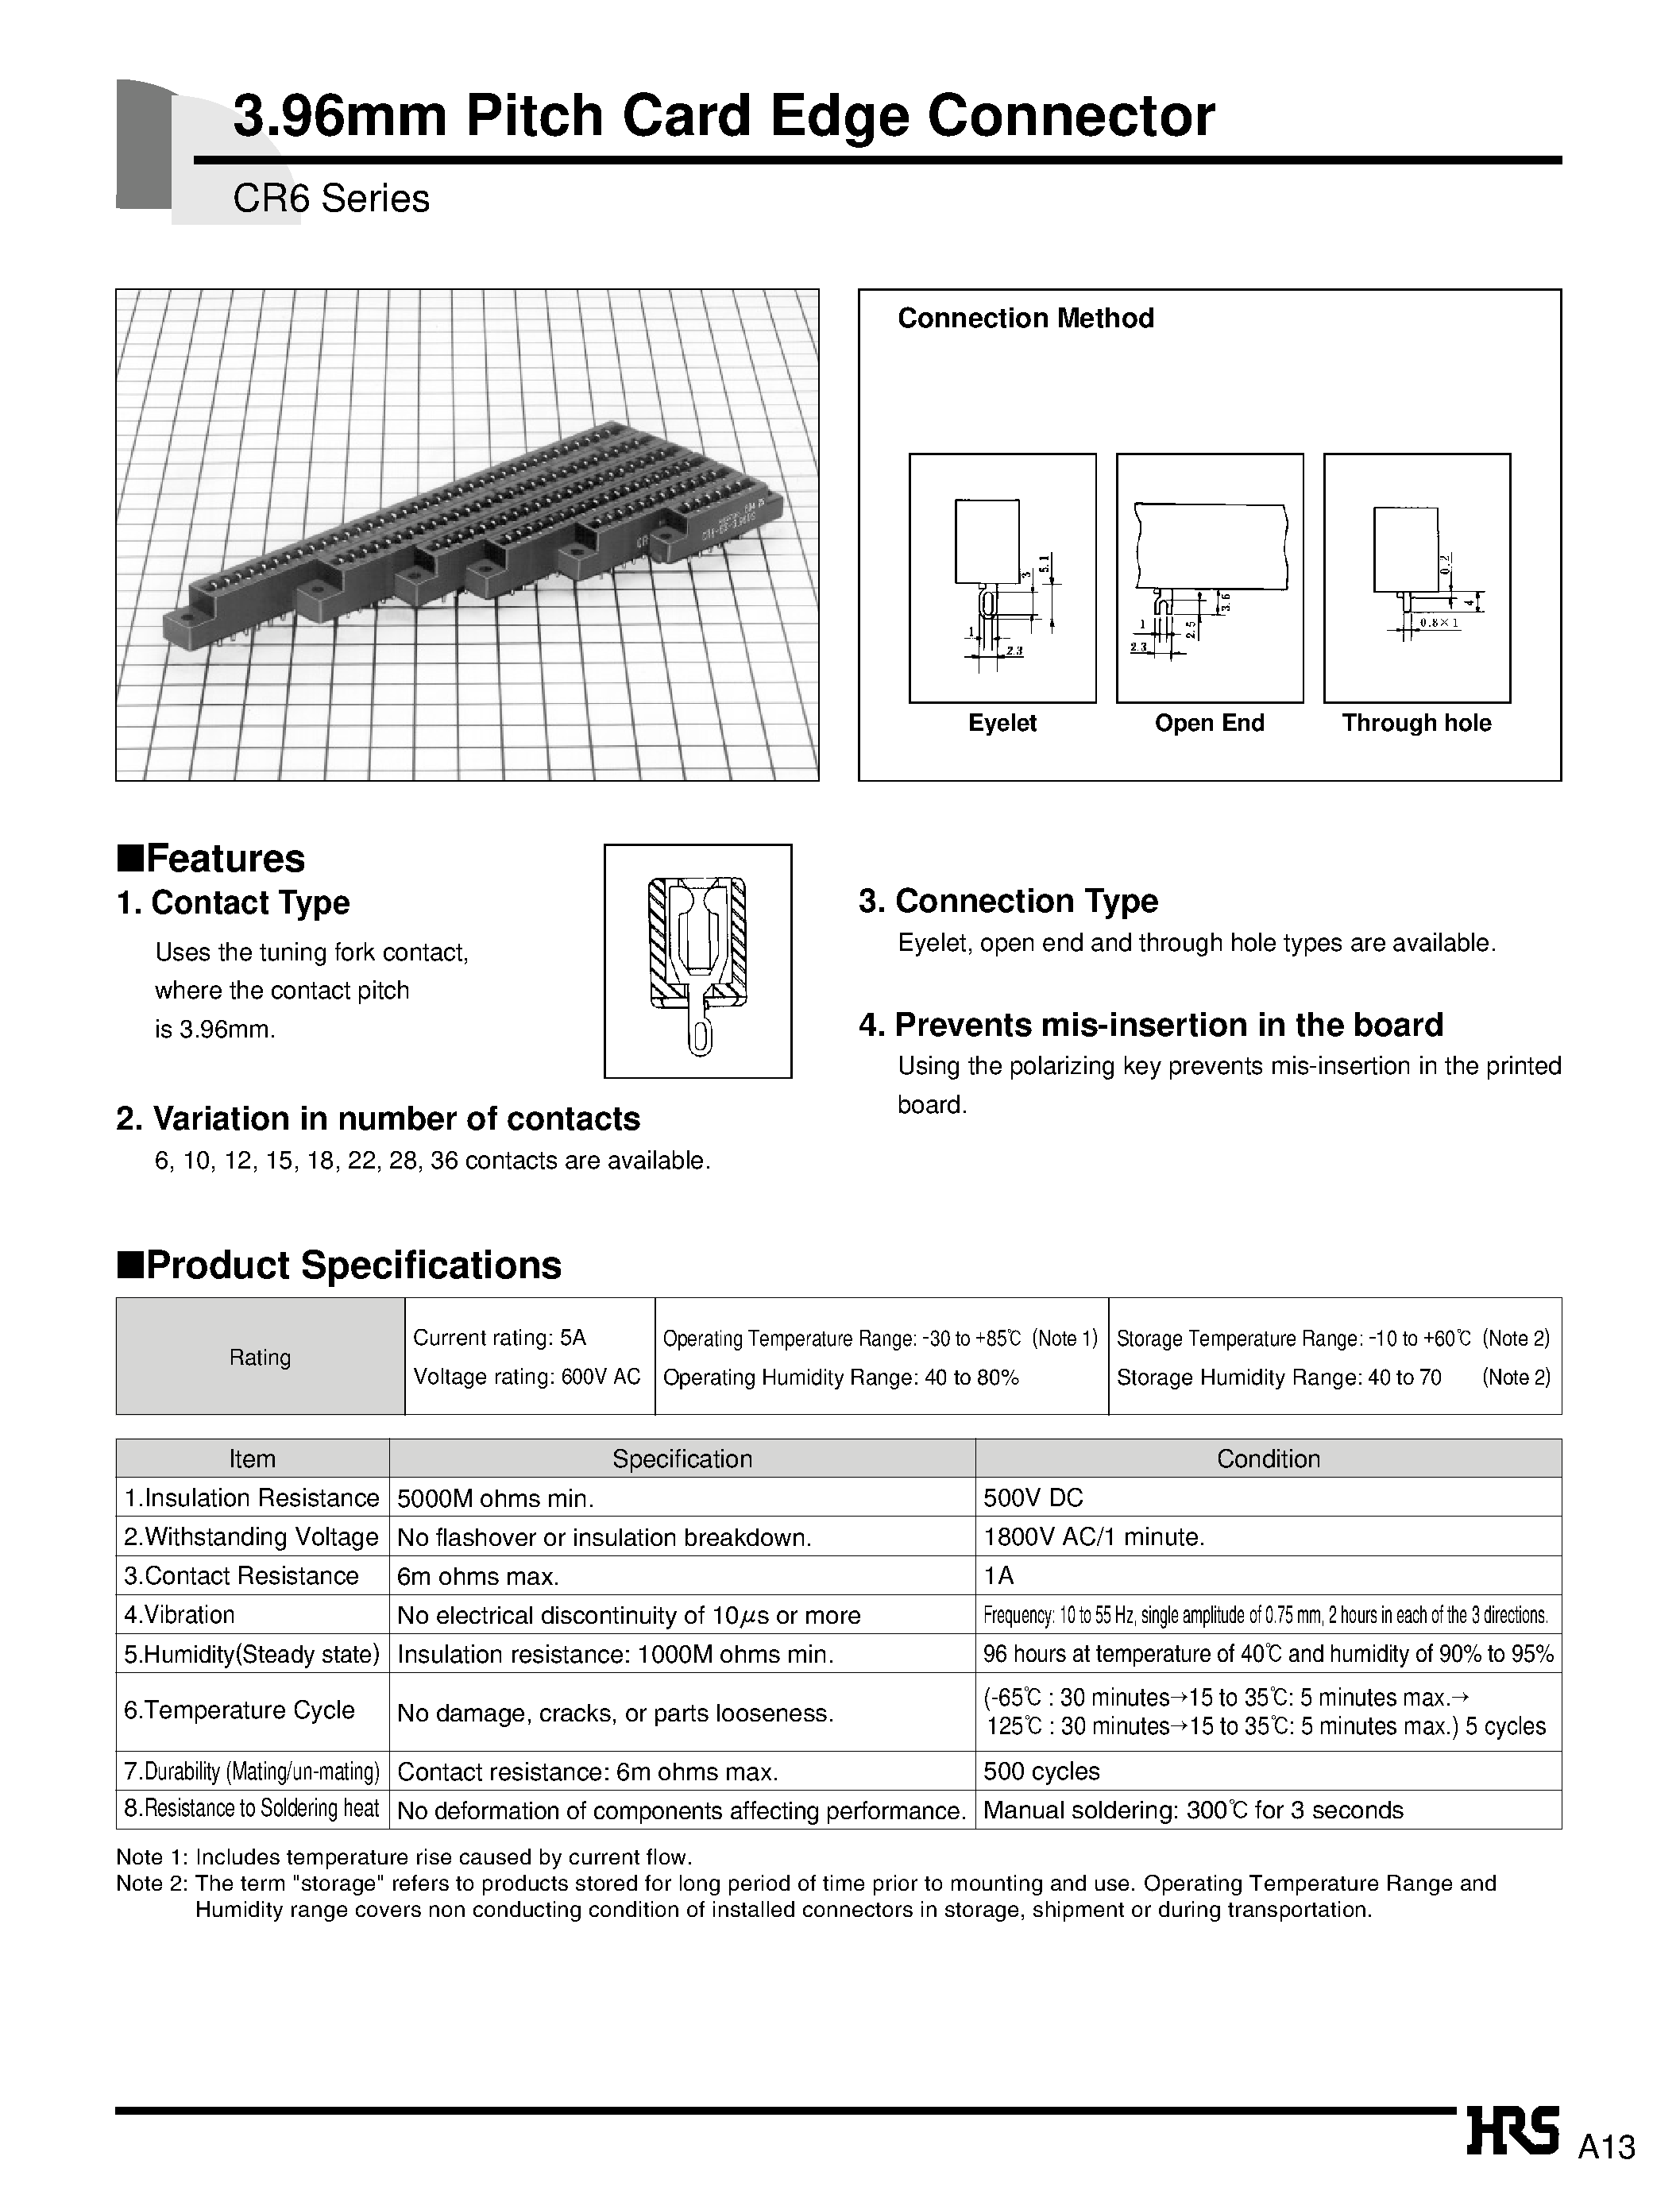 Datasheet CR6-10S-3.96E - 3.96mm Pitch Card Edge Connector page 1